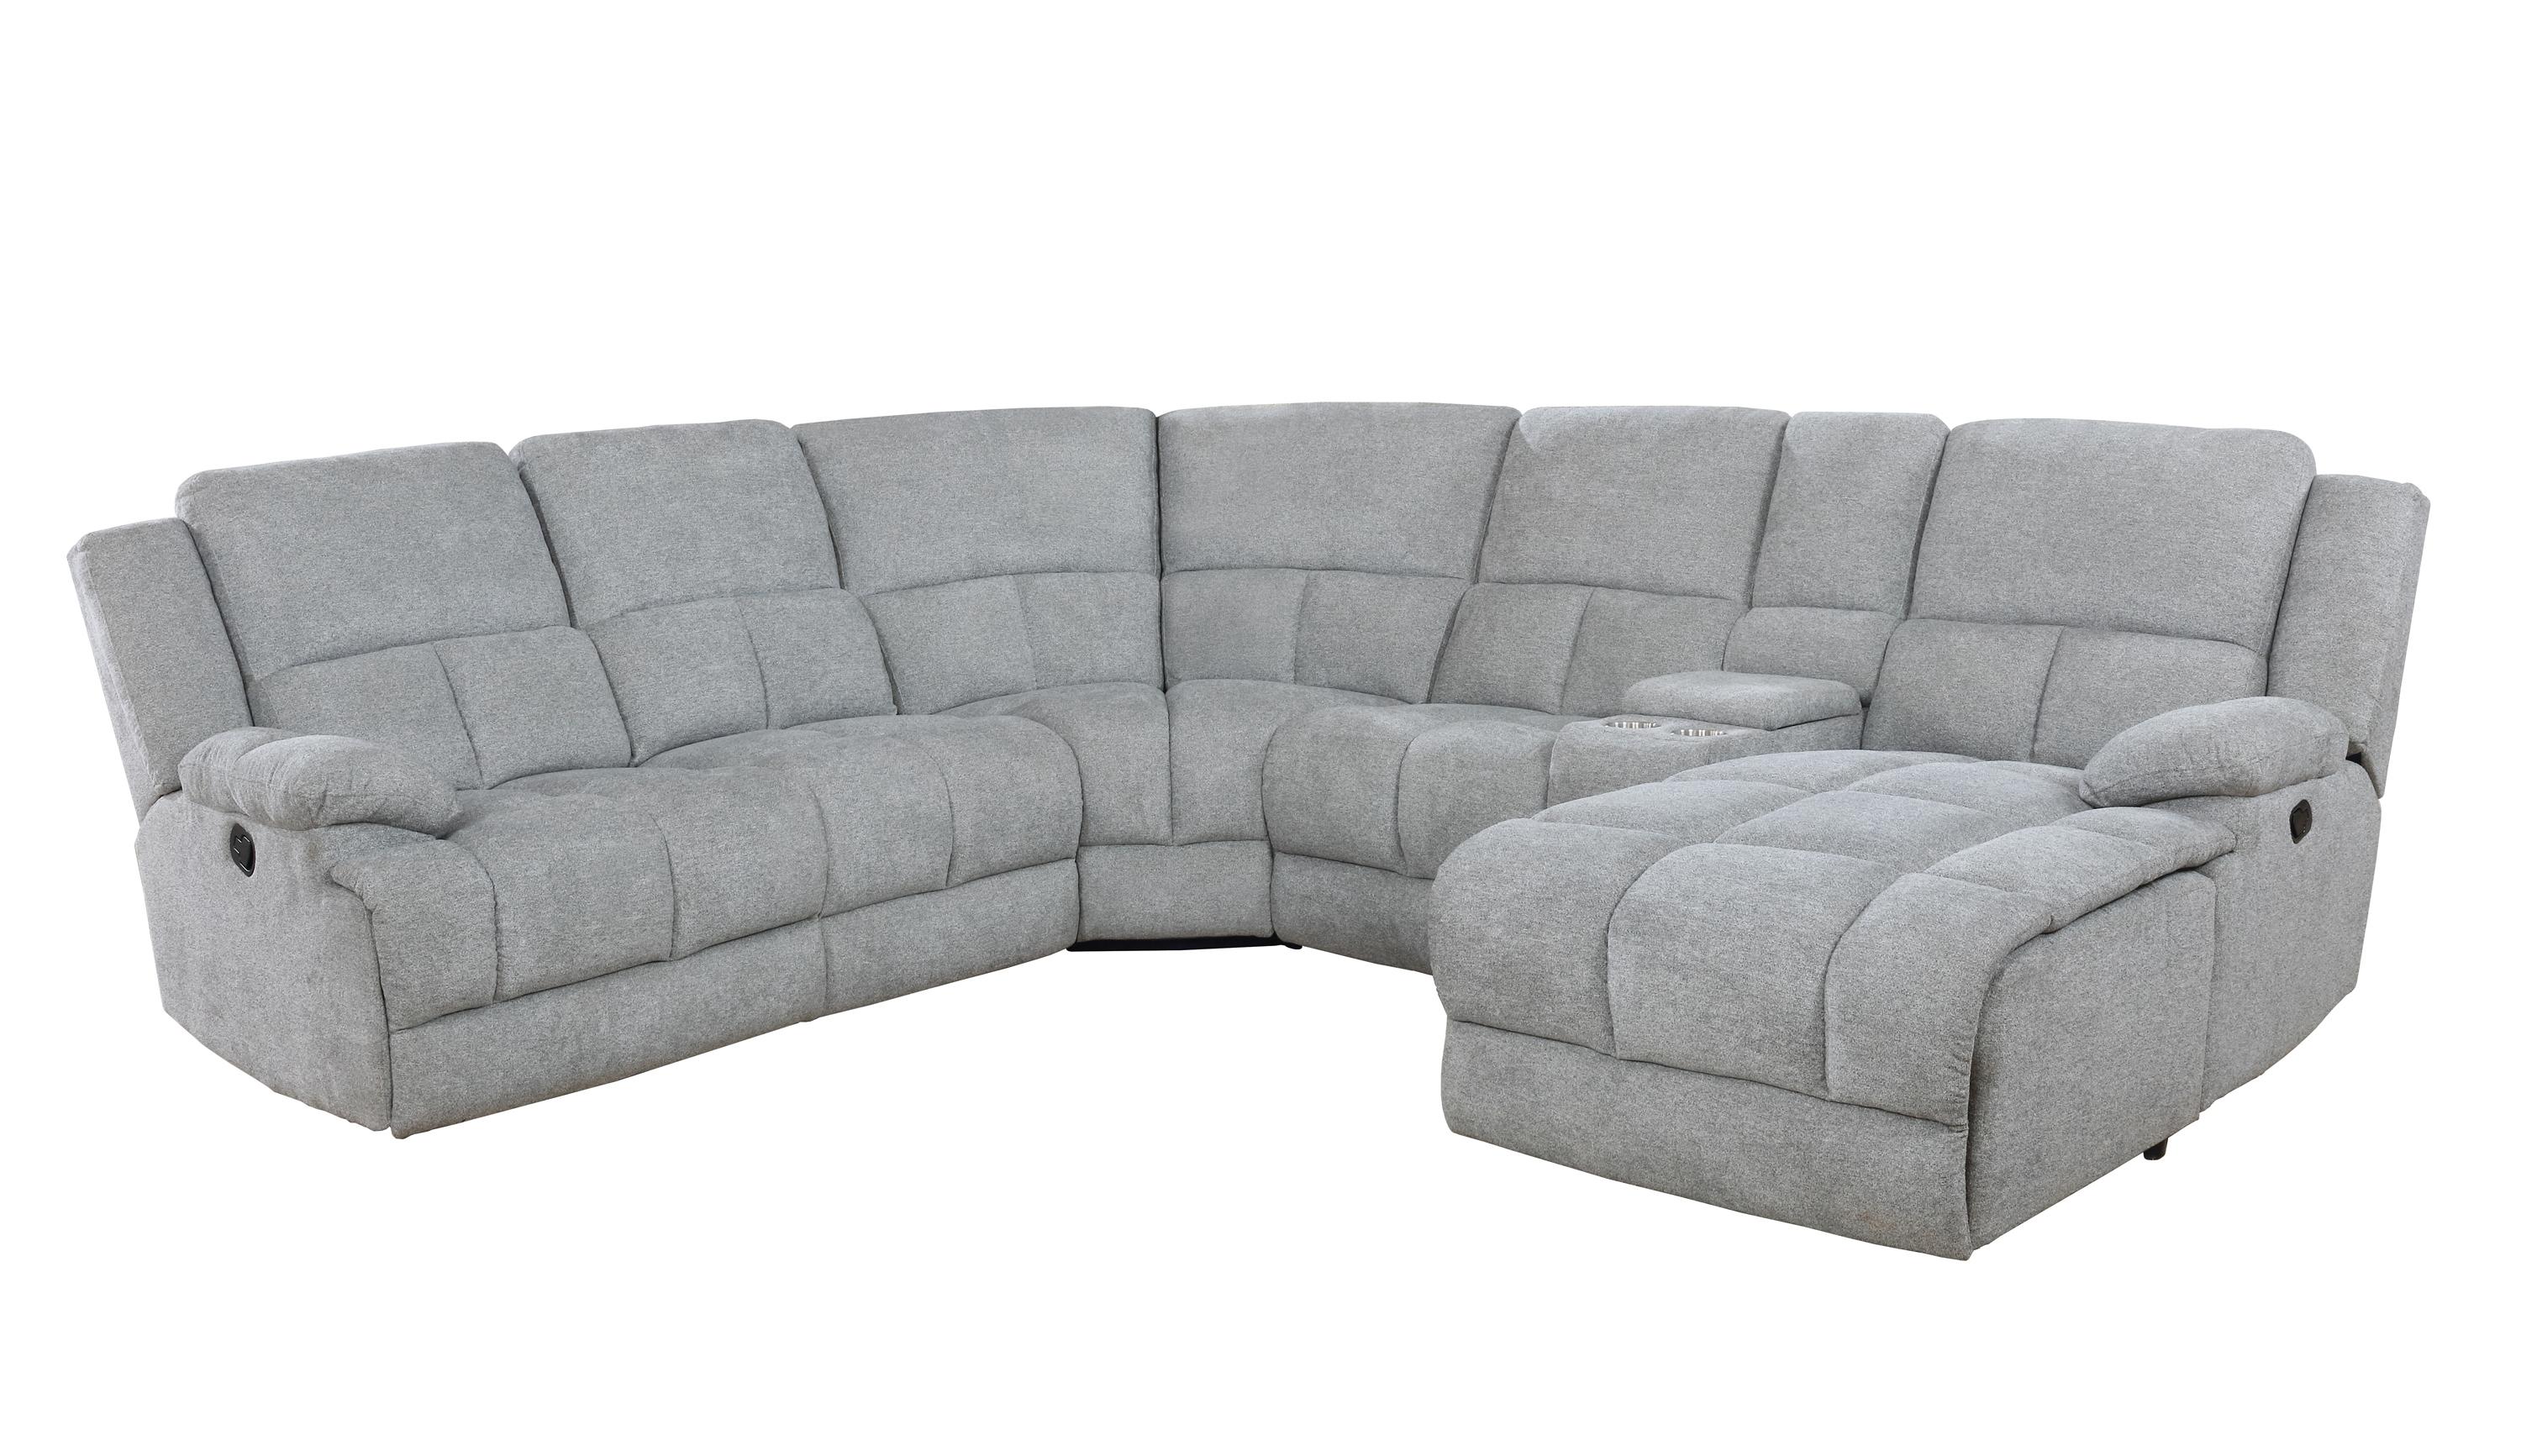 Transitional Motion Sectional 602560 Belize 602560 in Gray 